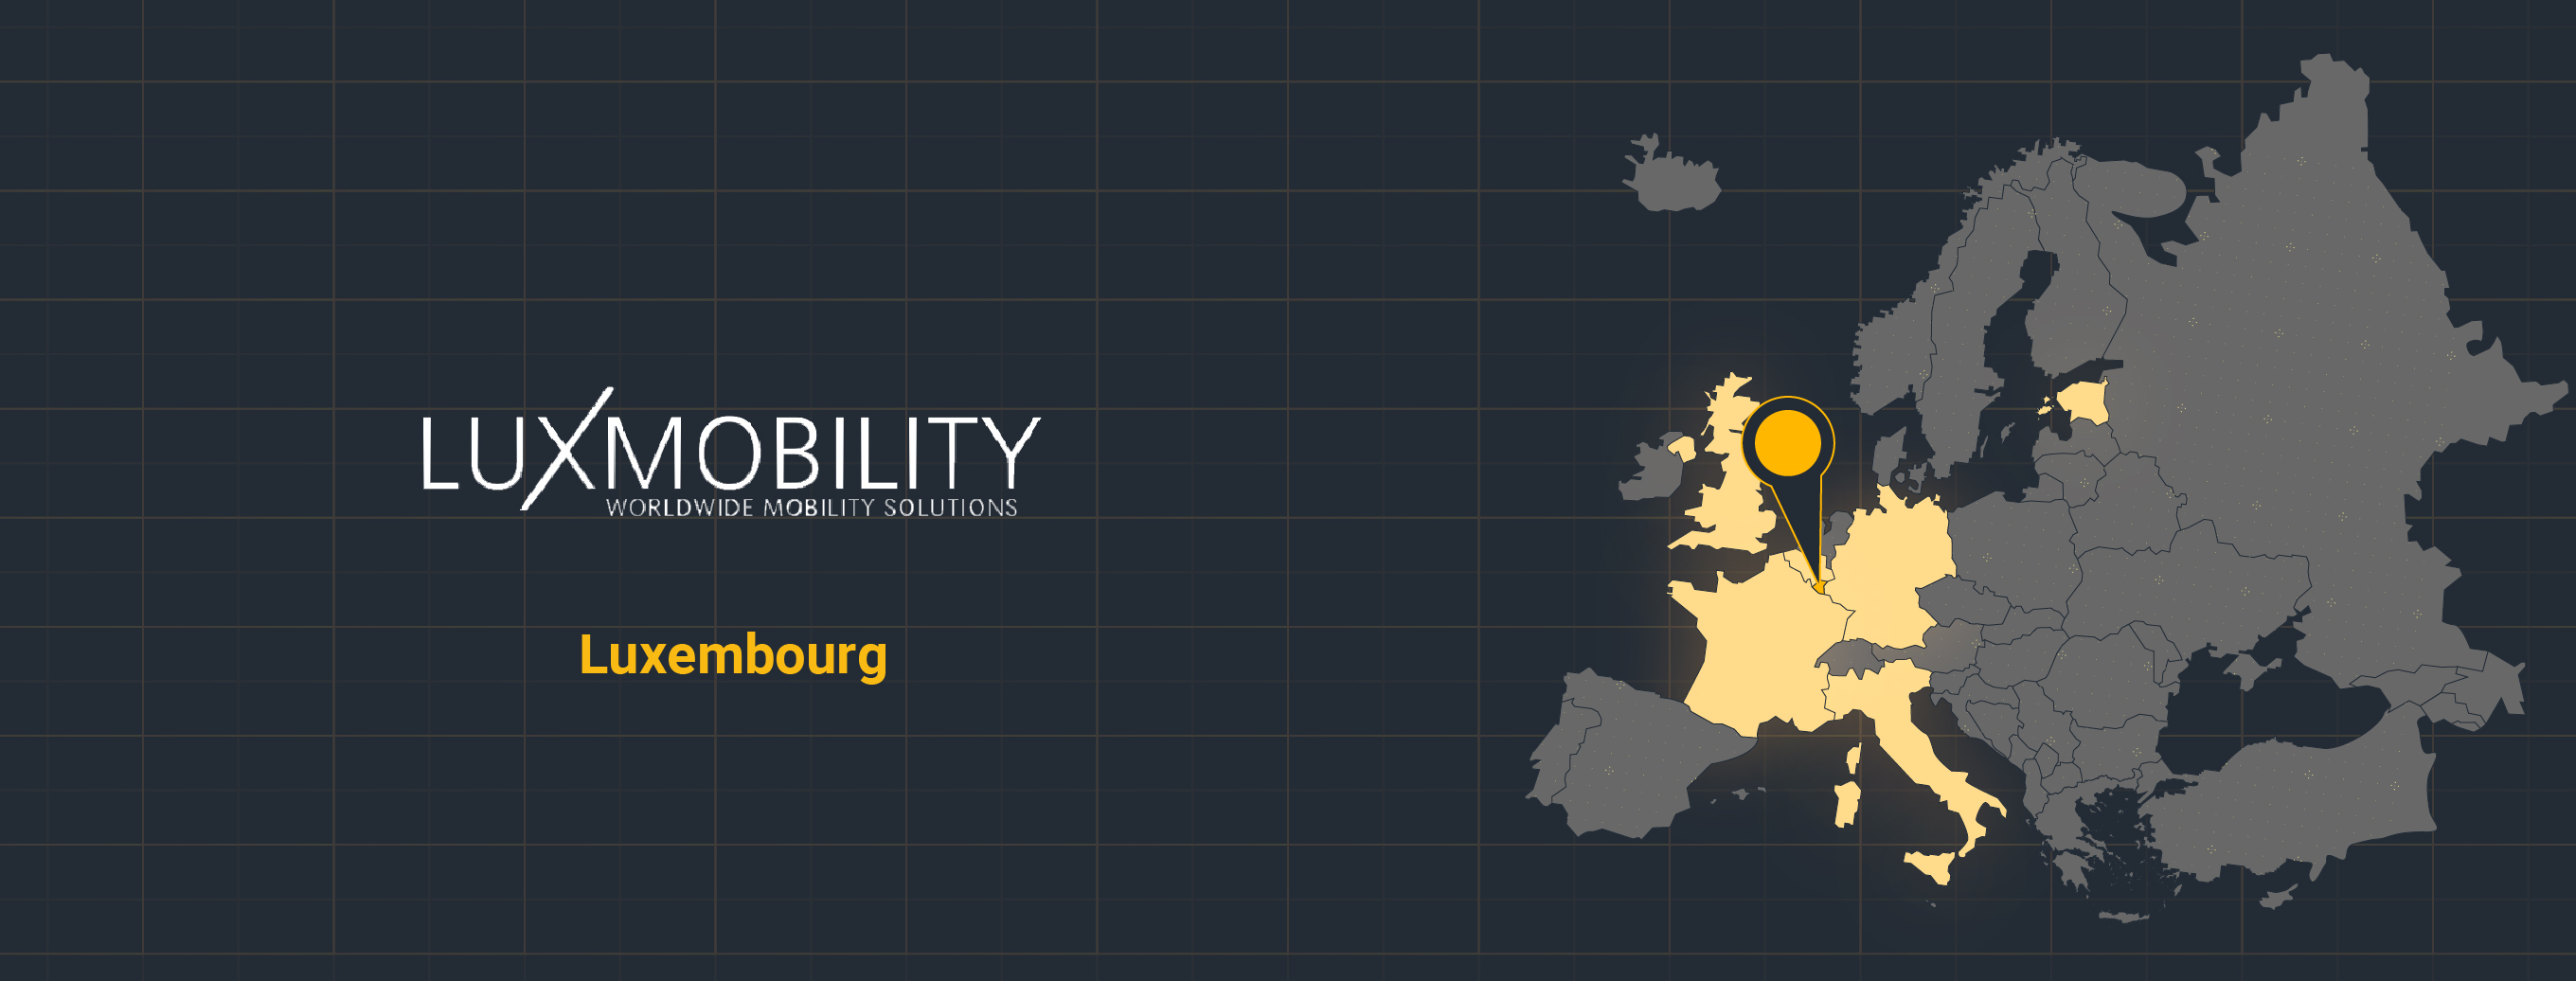 Luxmobility map highlights Luxembourg